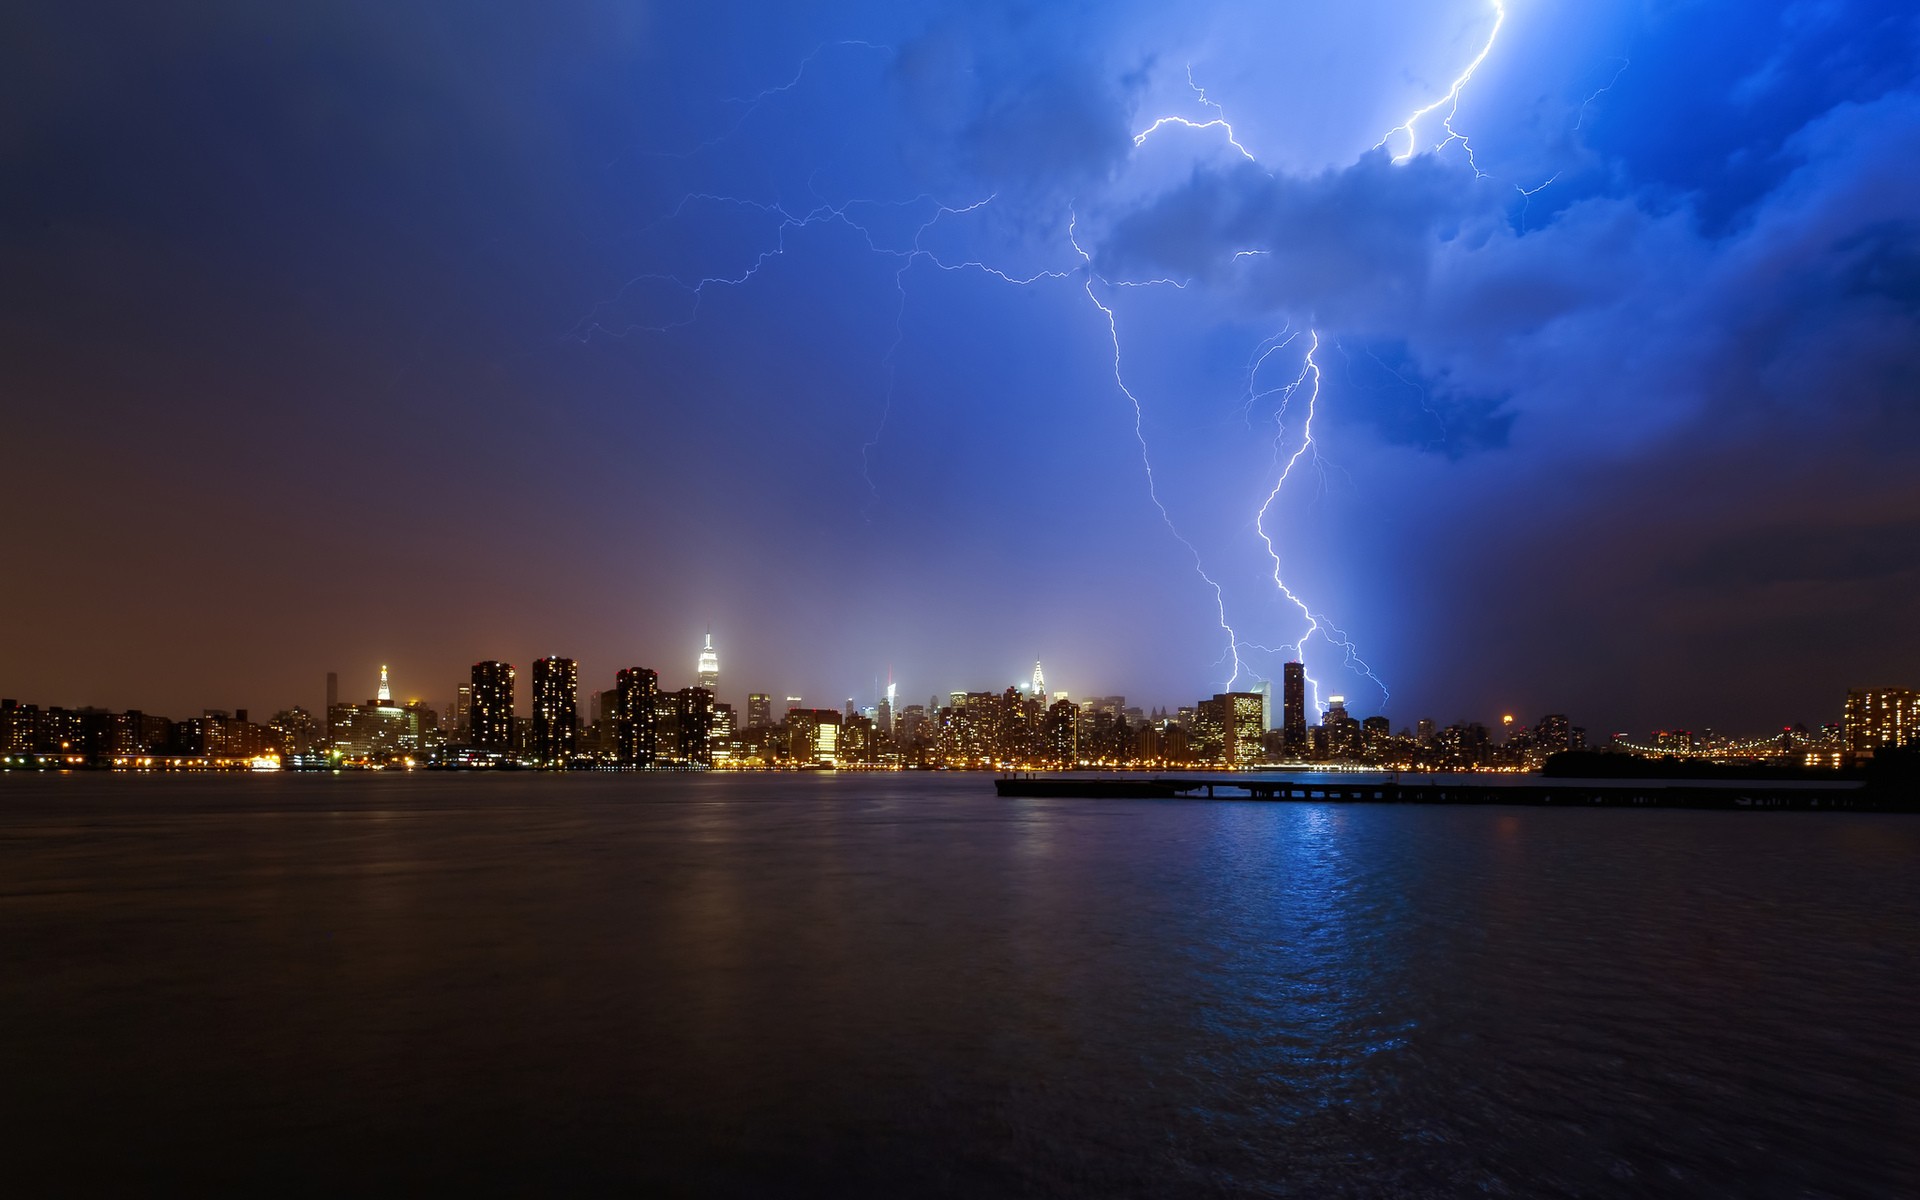 photograqphy, Nature, Cityscapes, Cities, Night, Lights, Hdr, Architecture, Buildings, Skyscrapers, Storm, Lightning, Clouds, Sky, Scenic Wallpaper